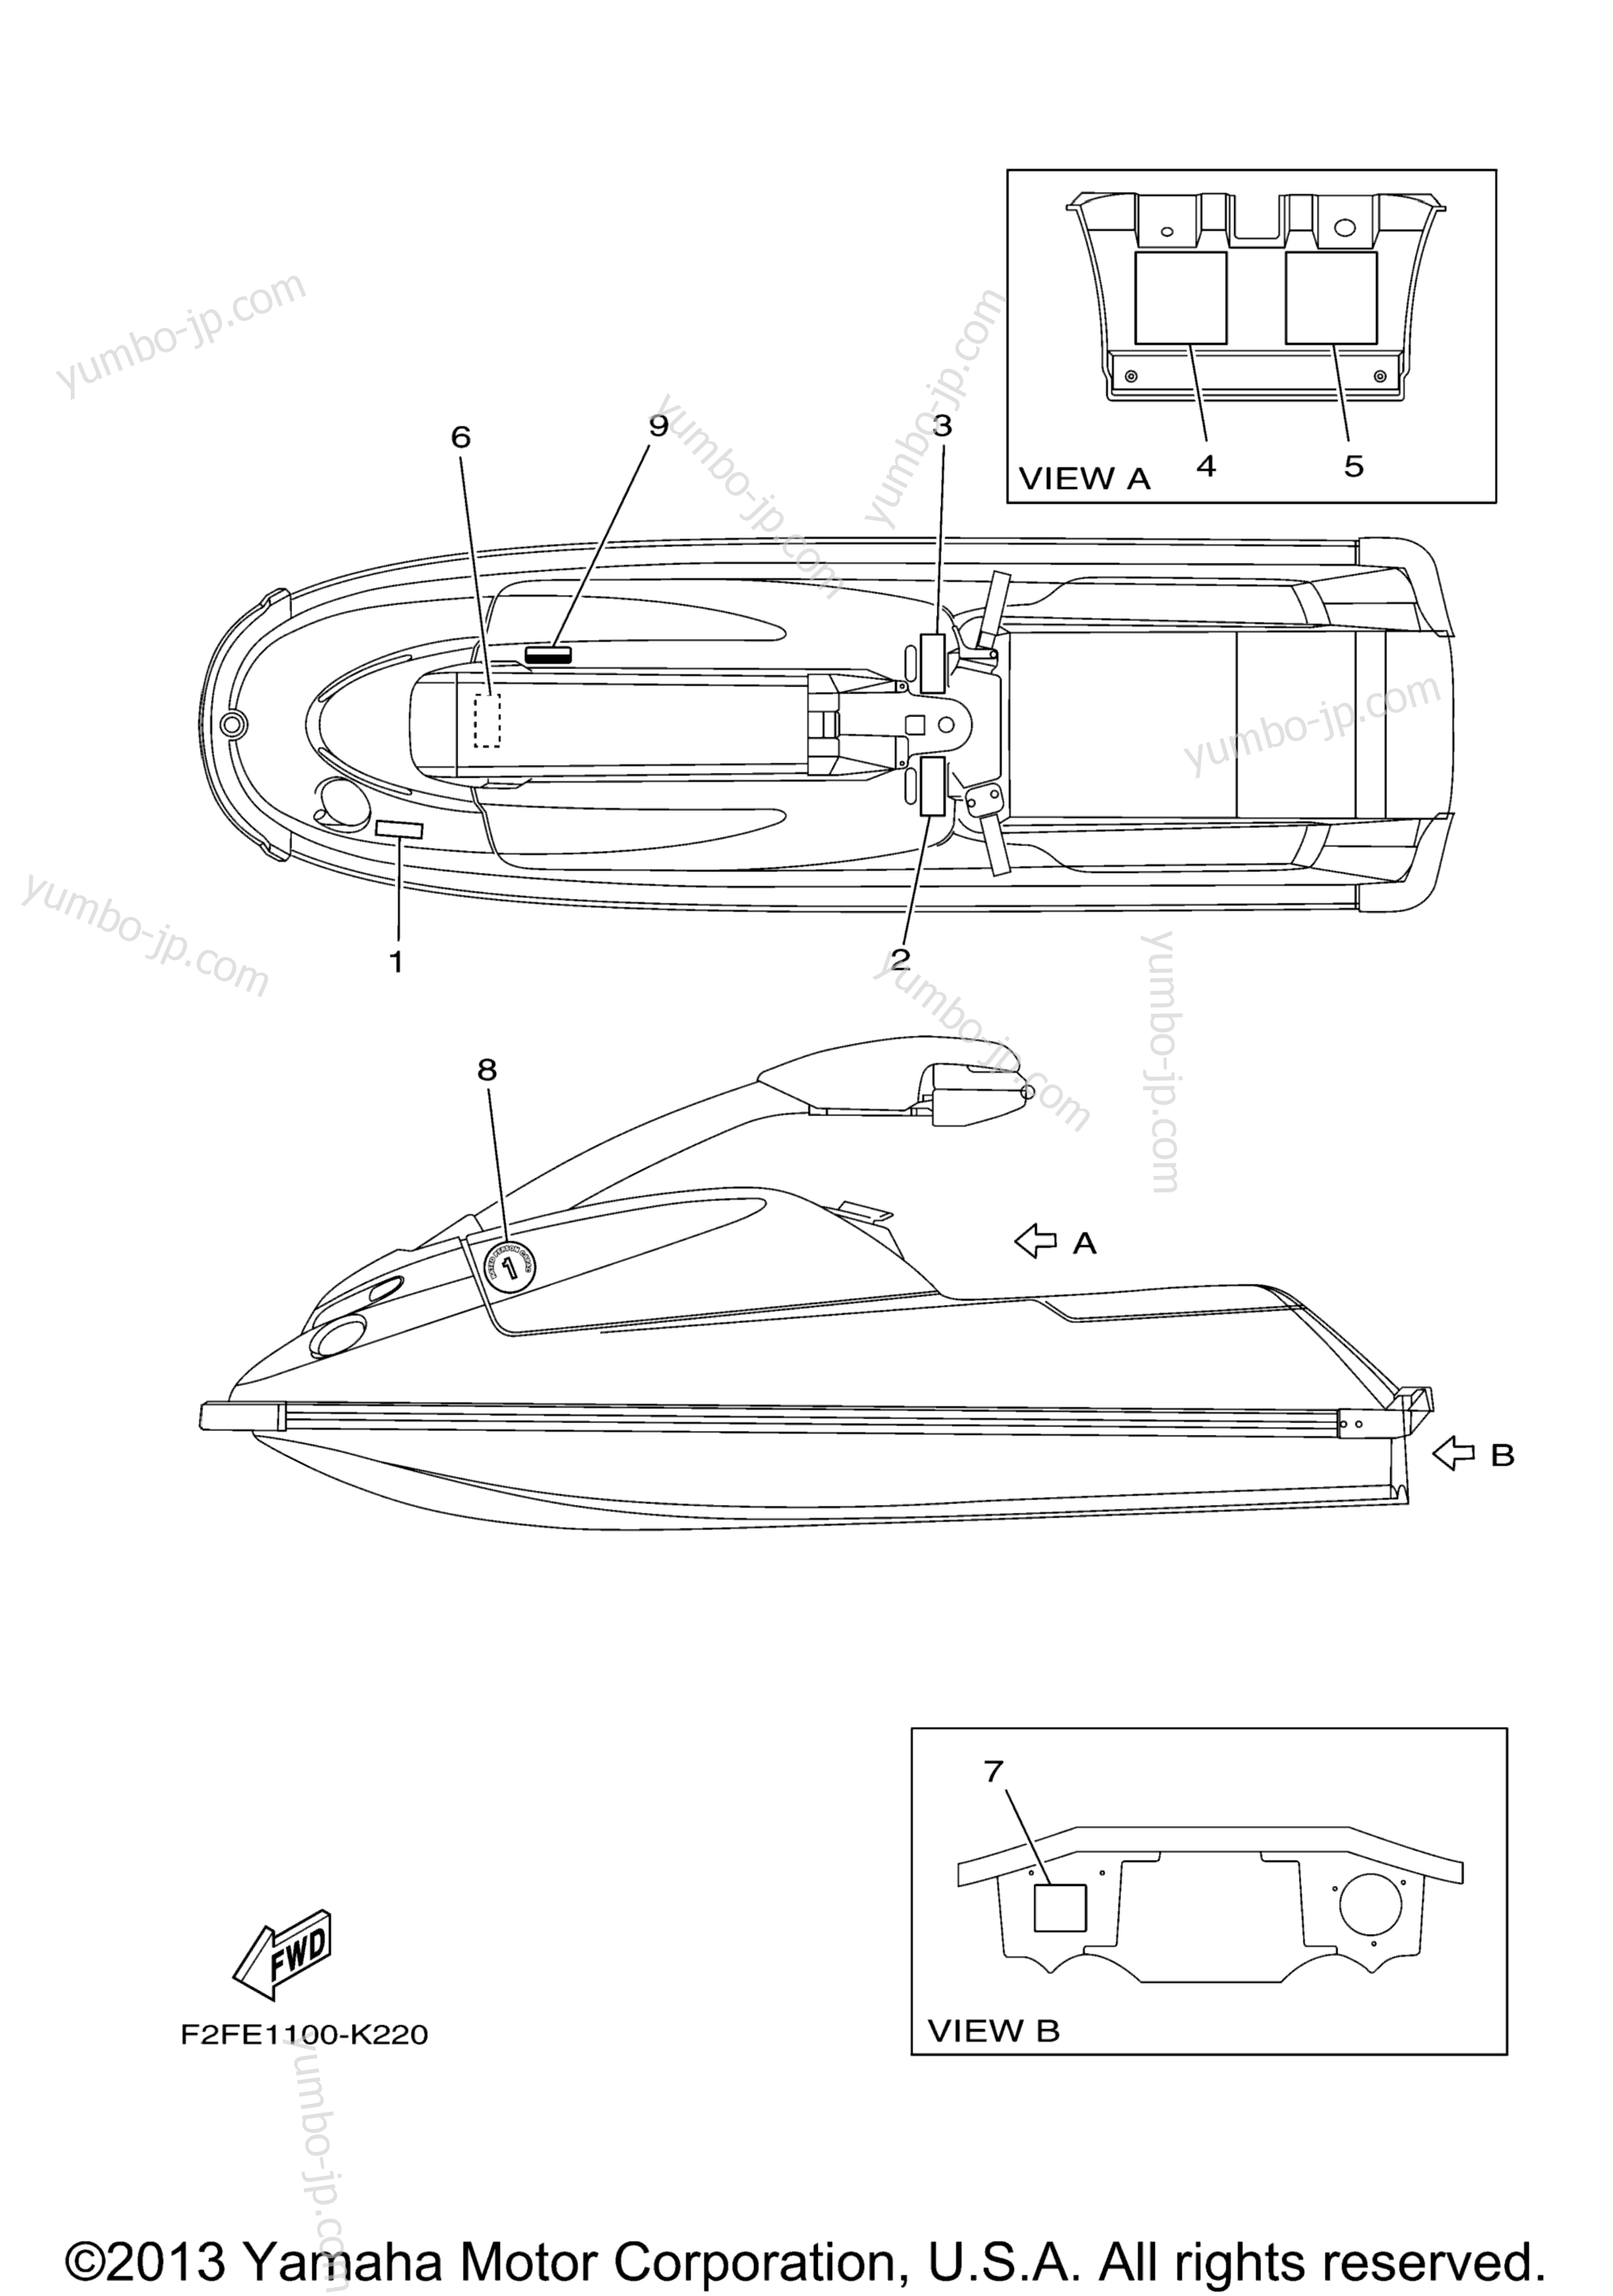 Important Labels for watercrafts YAMAHA SUPER JET (SJ700BL) 2012 year